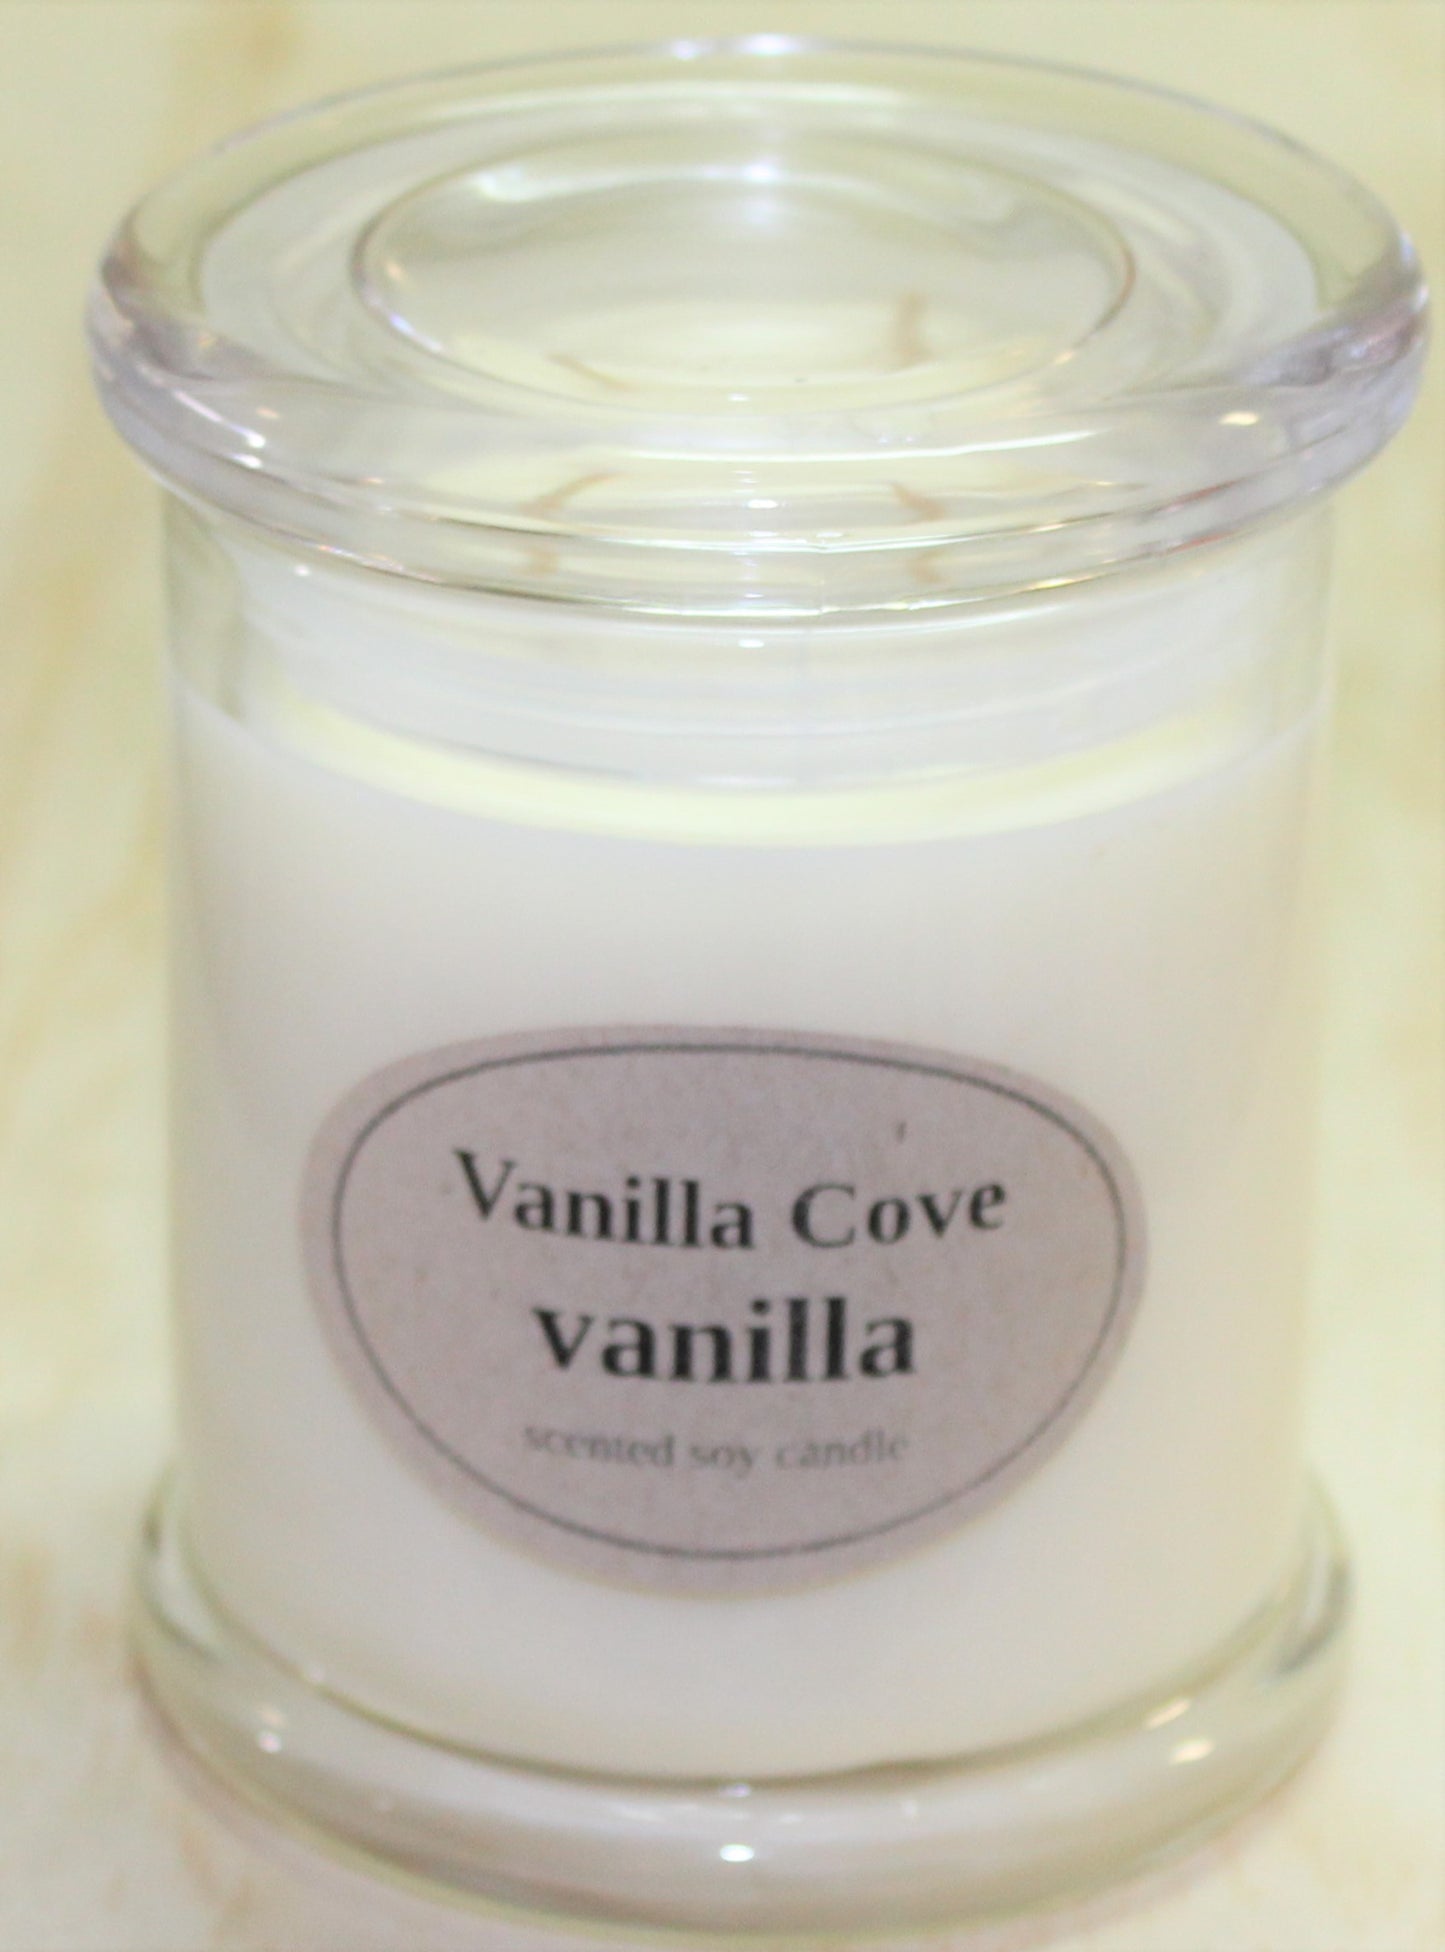 Vanilla Cove Soy Candle 50 hour Vanilla Fragrance in clear glass jar and glass lid